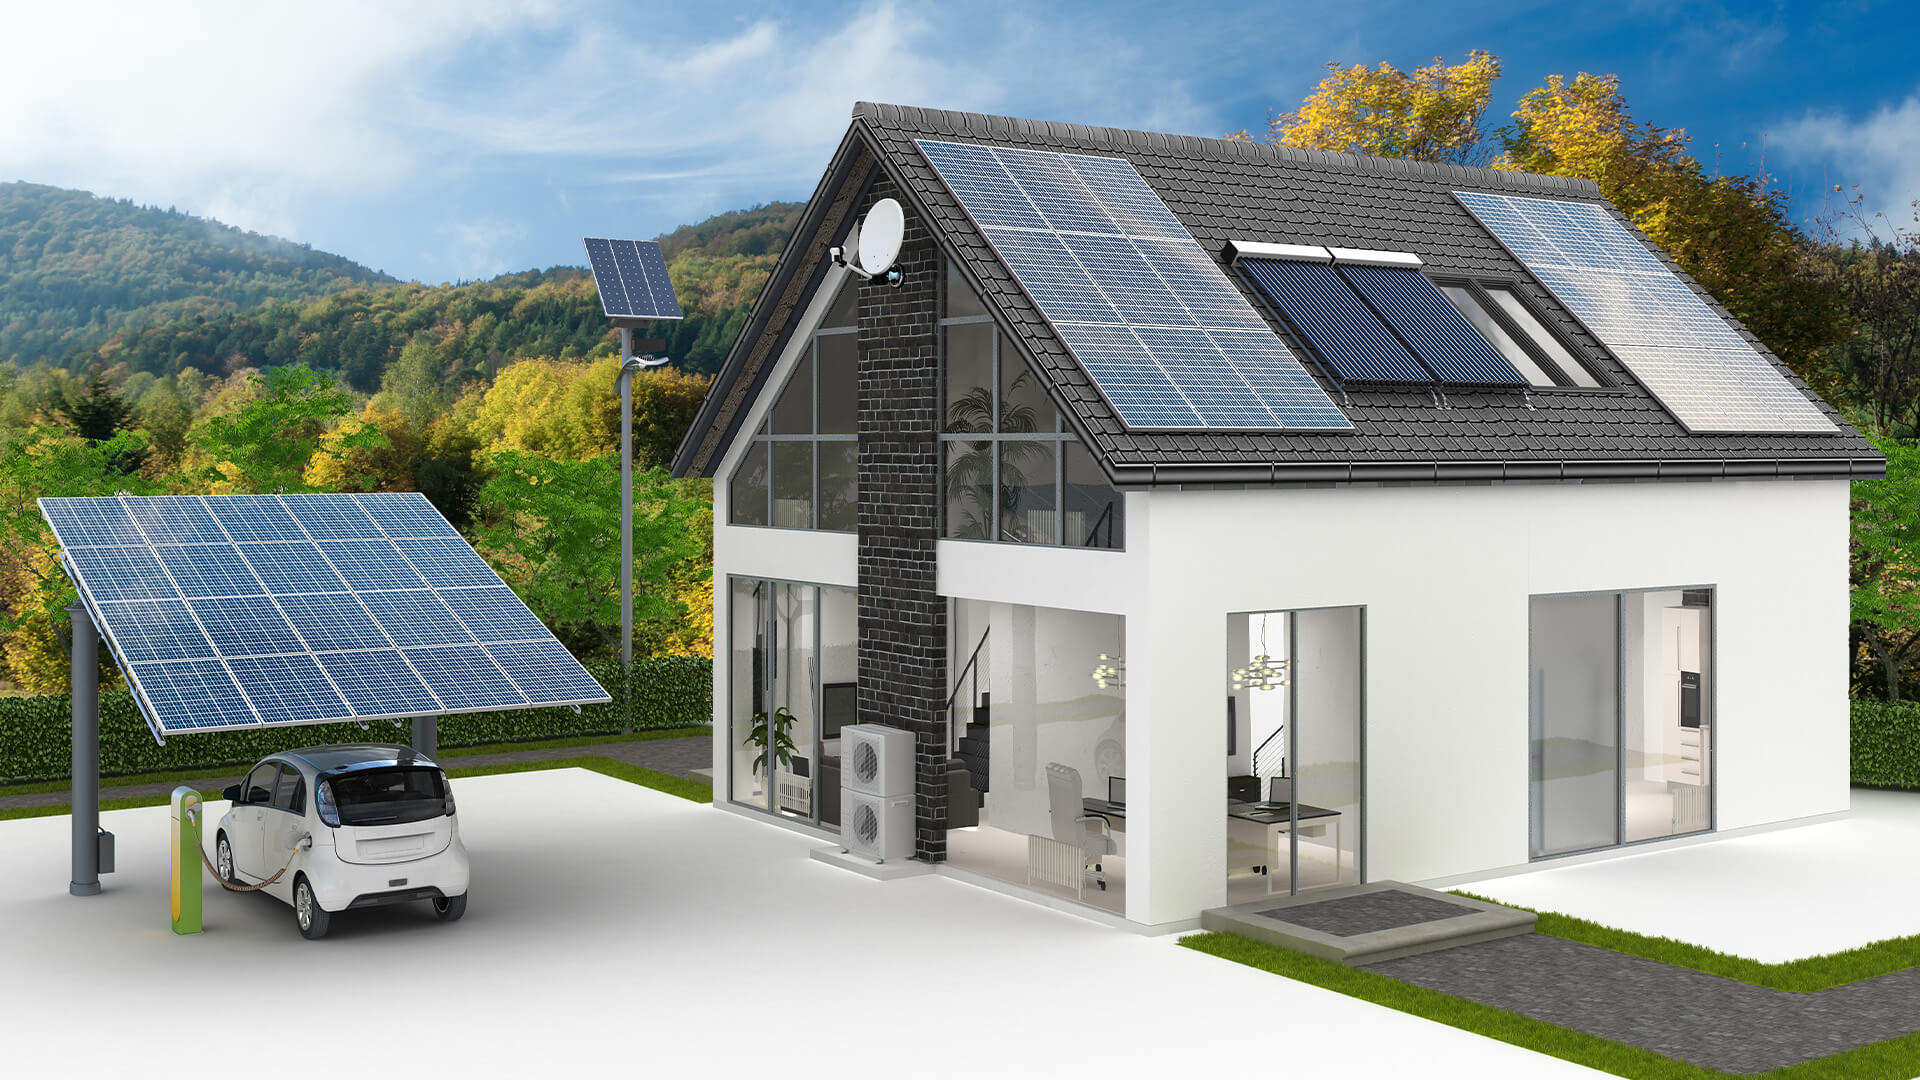 3D rendoured image of a modern home with solar pannels on the roof powering the electric car on the drive